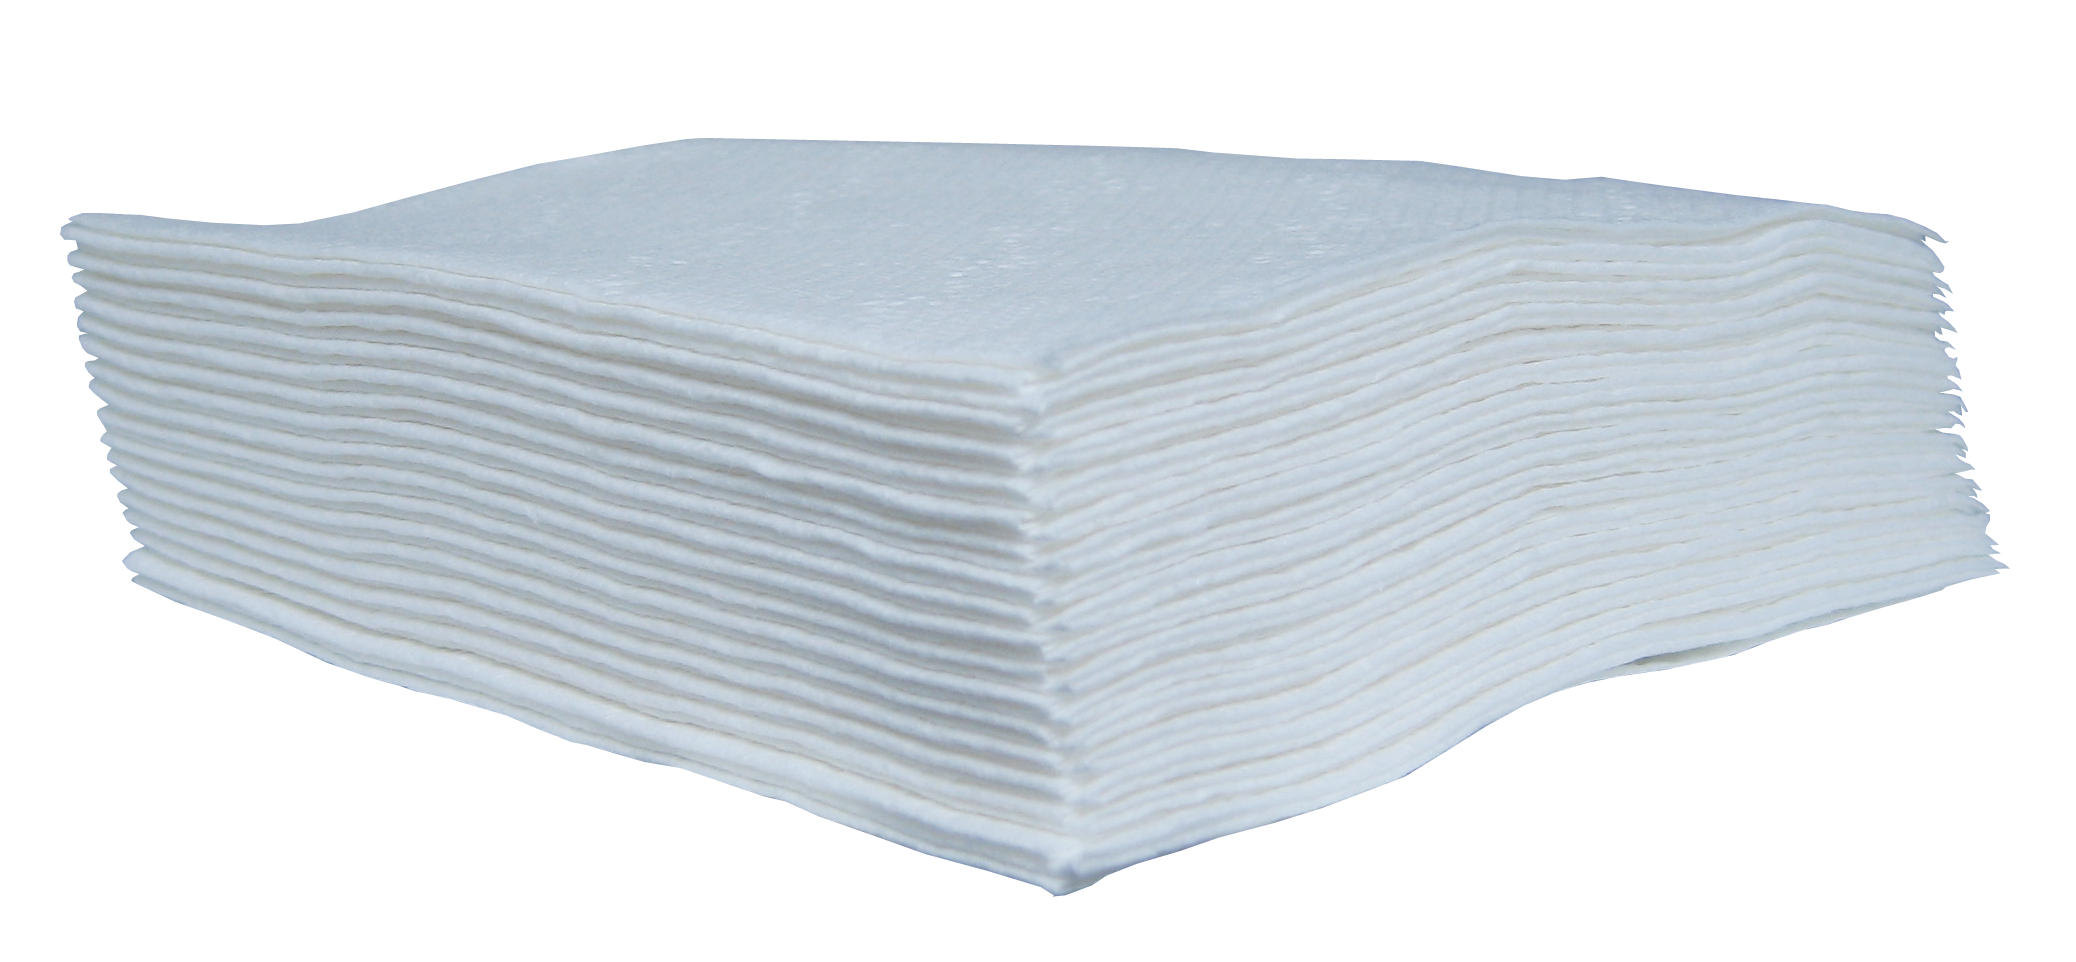 Paper Napkins (1-ply / 2-ply)